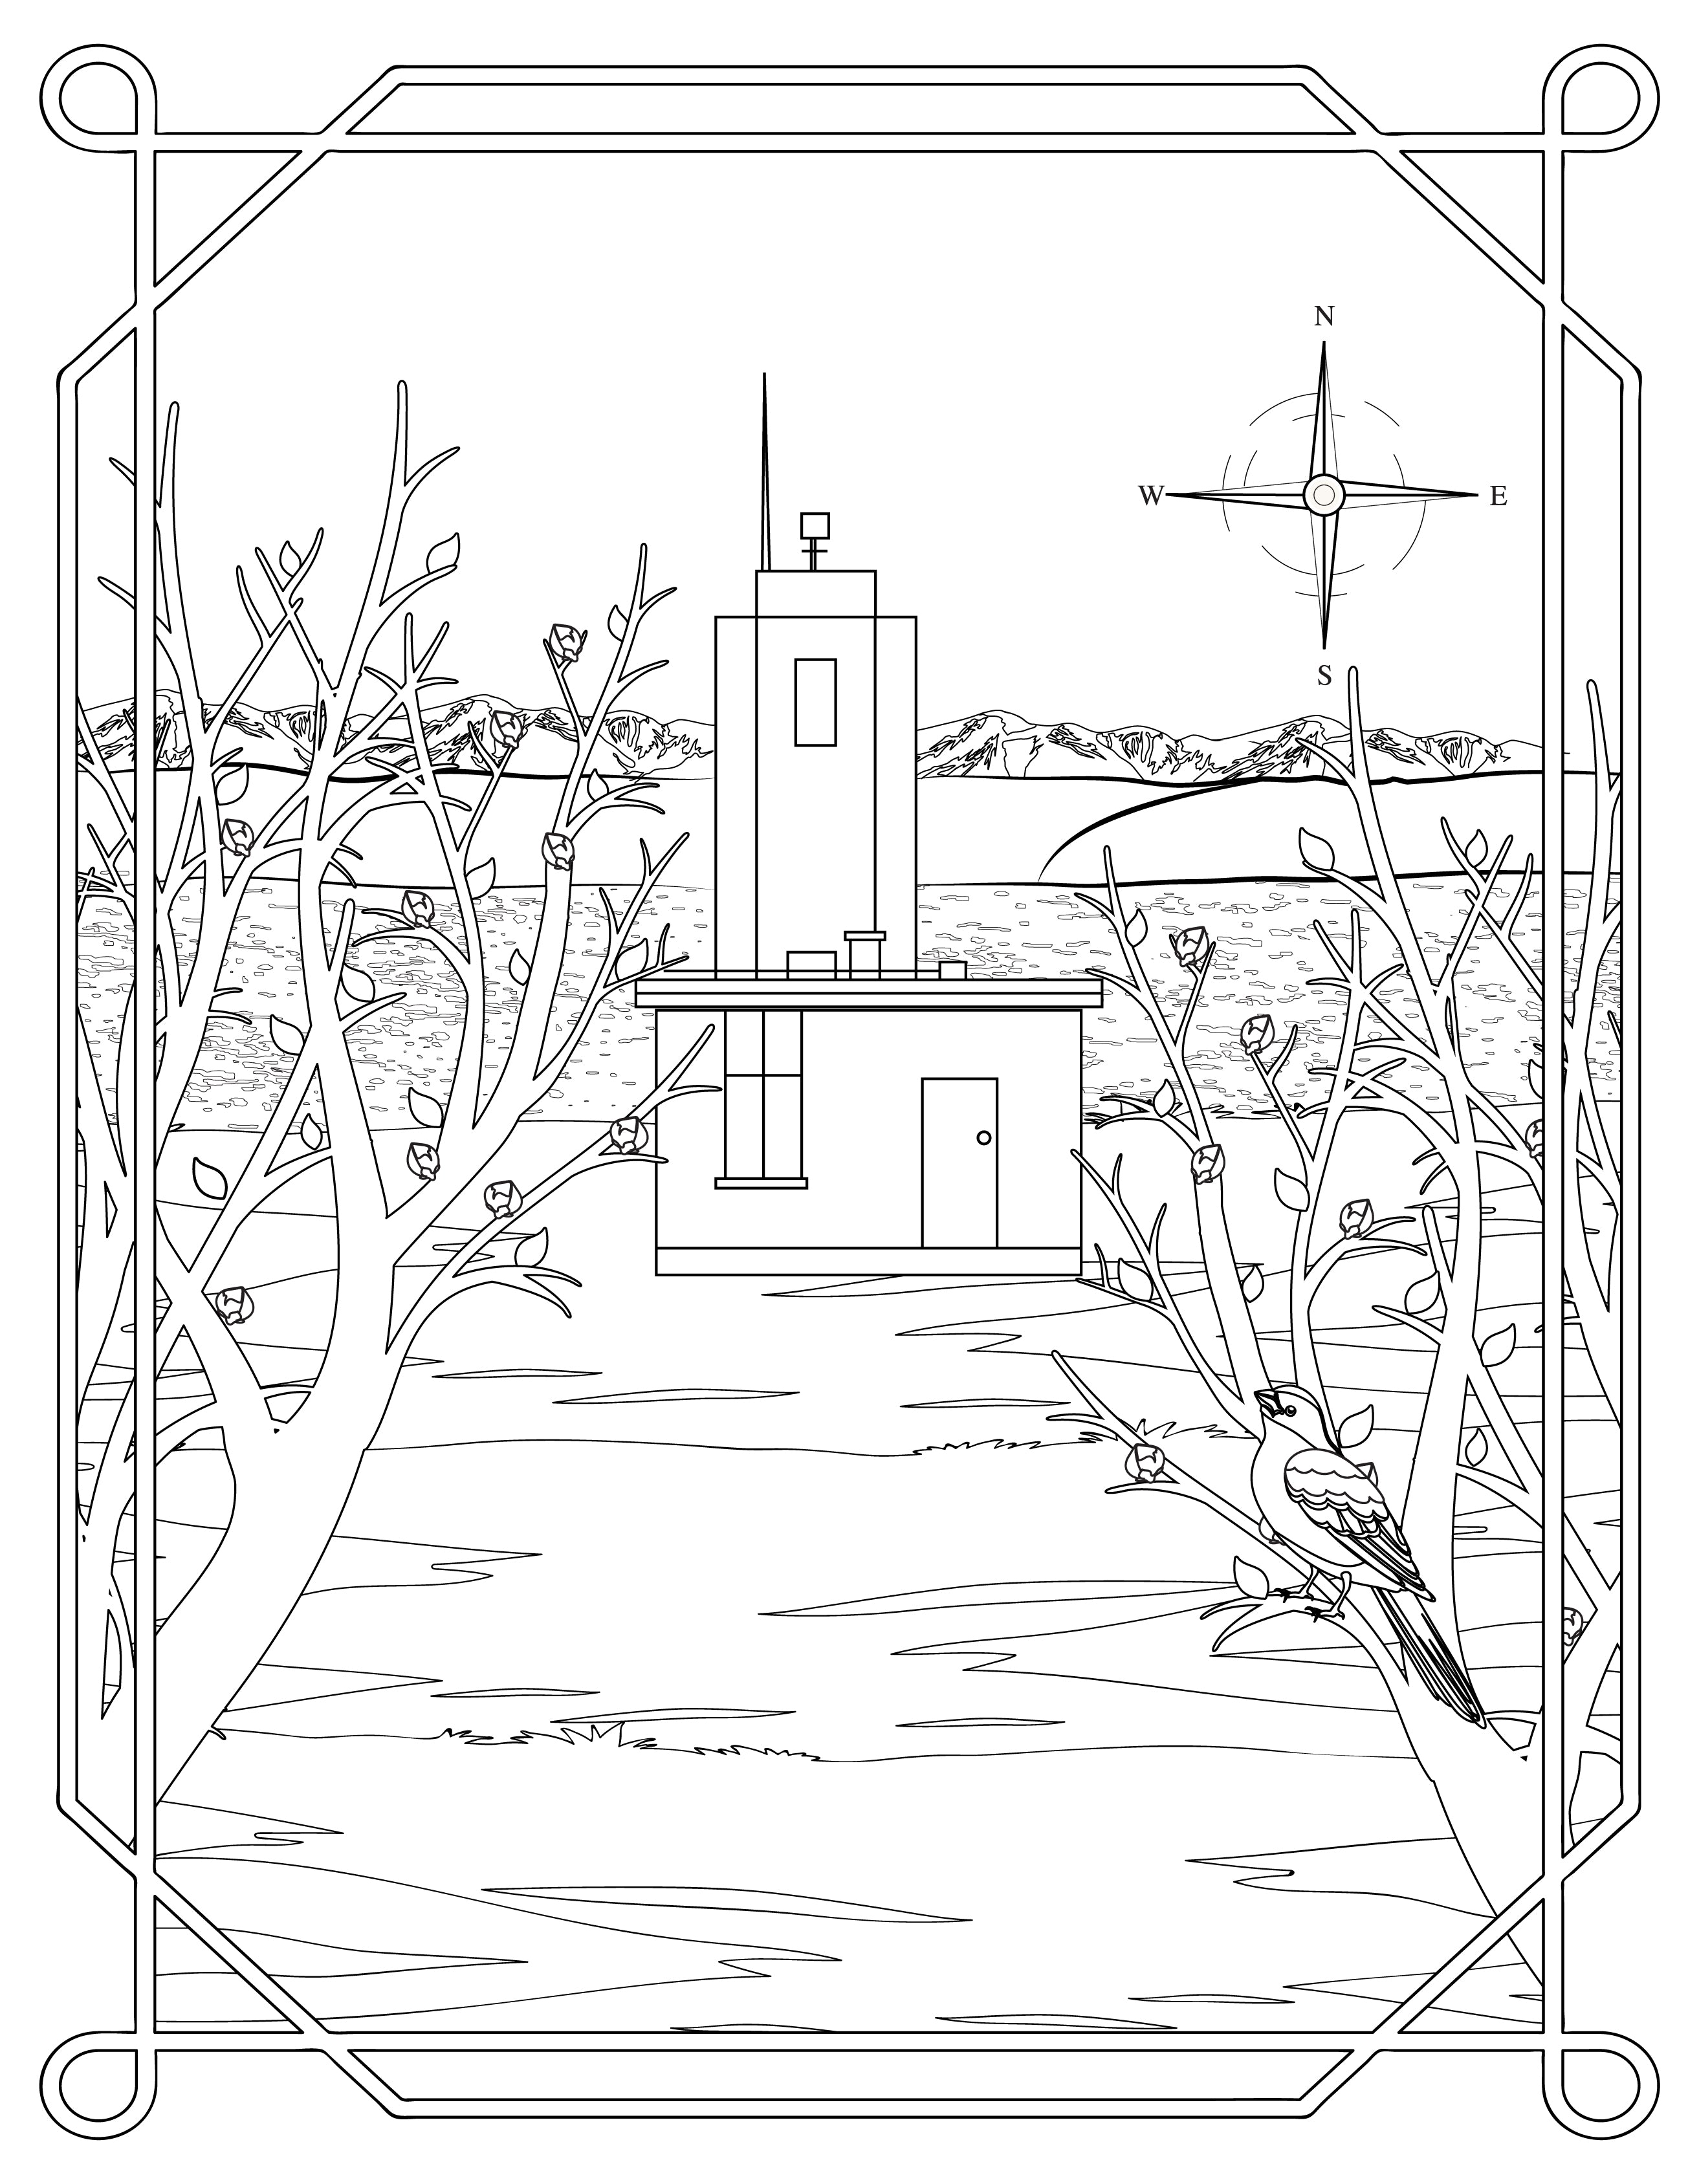 Single Coloring Book Page - Brown's Point Lighthouse, Washington - Digital Print-from-Home